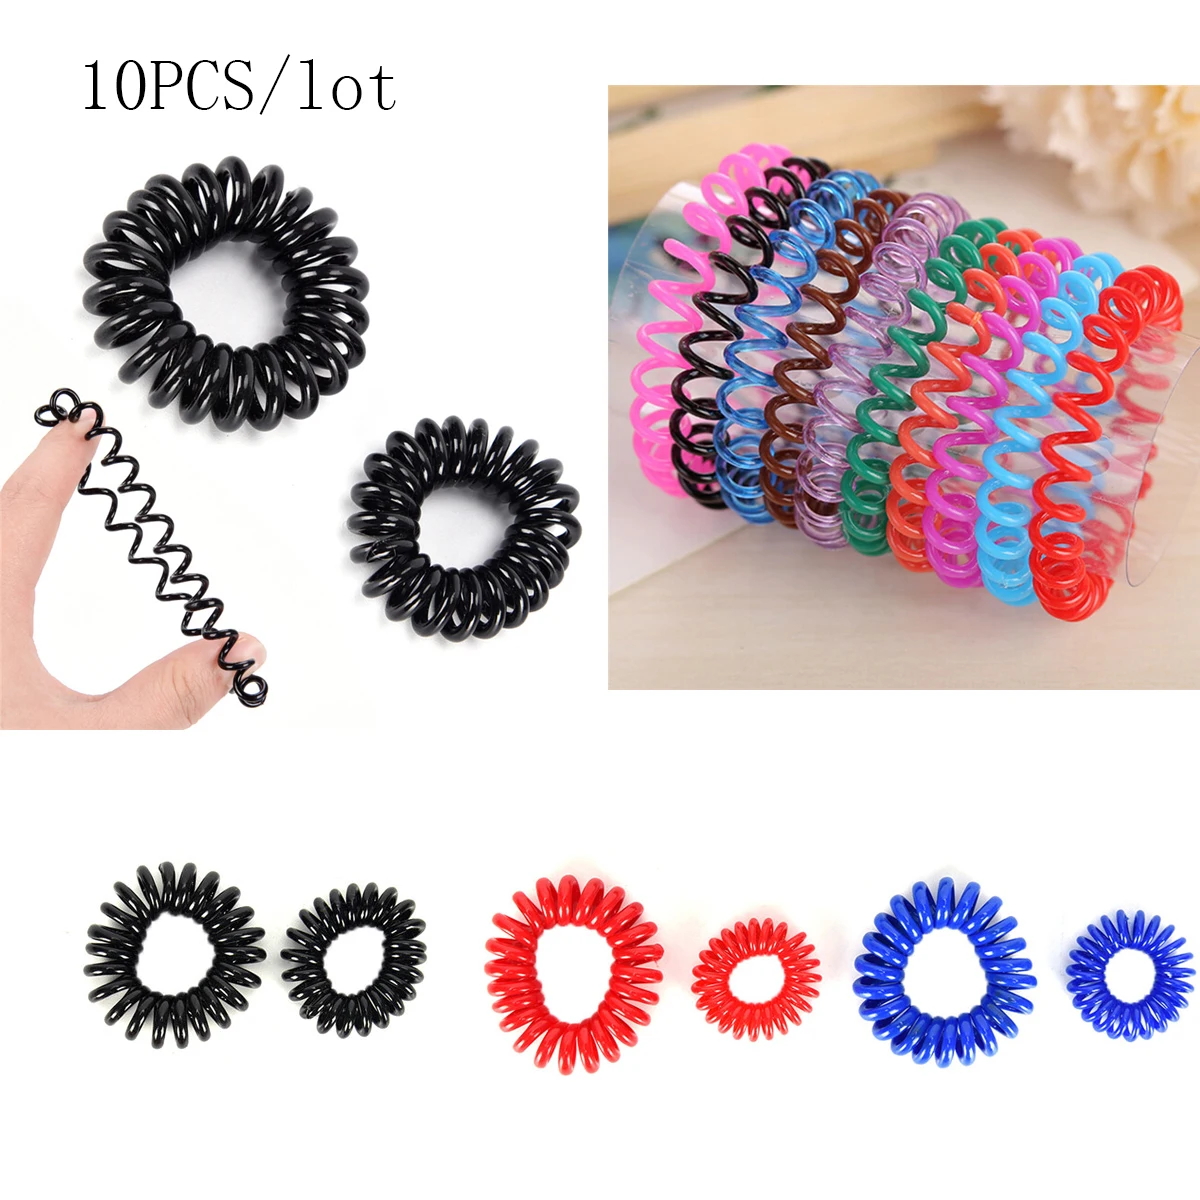 

10PCS/lot Colorful Small Telephone Line Hair Ropes Girls Elastic Hair Bands Kid Ponytail Holder Tie Gum Hair Accessories